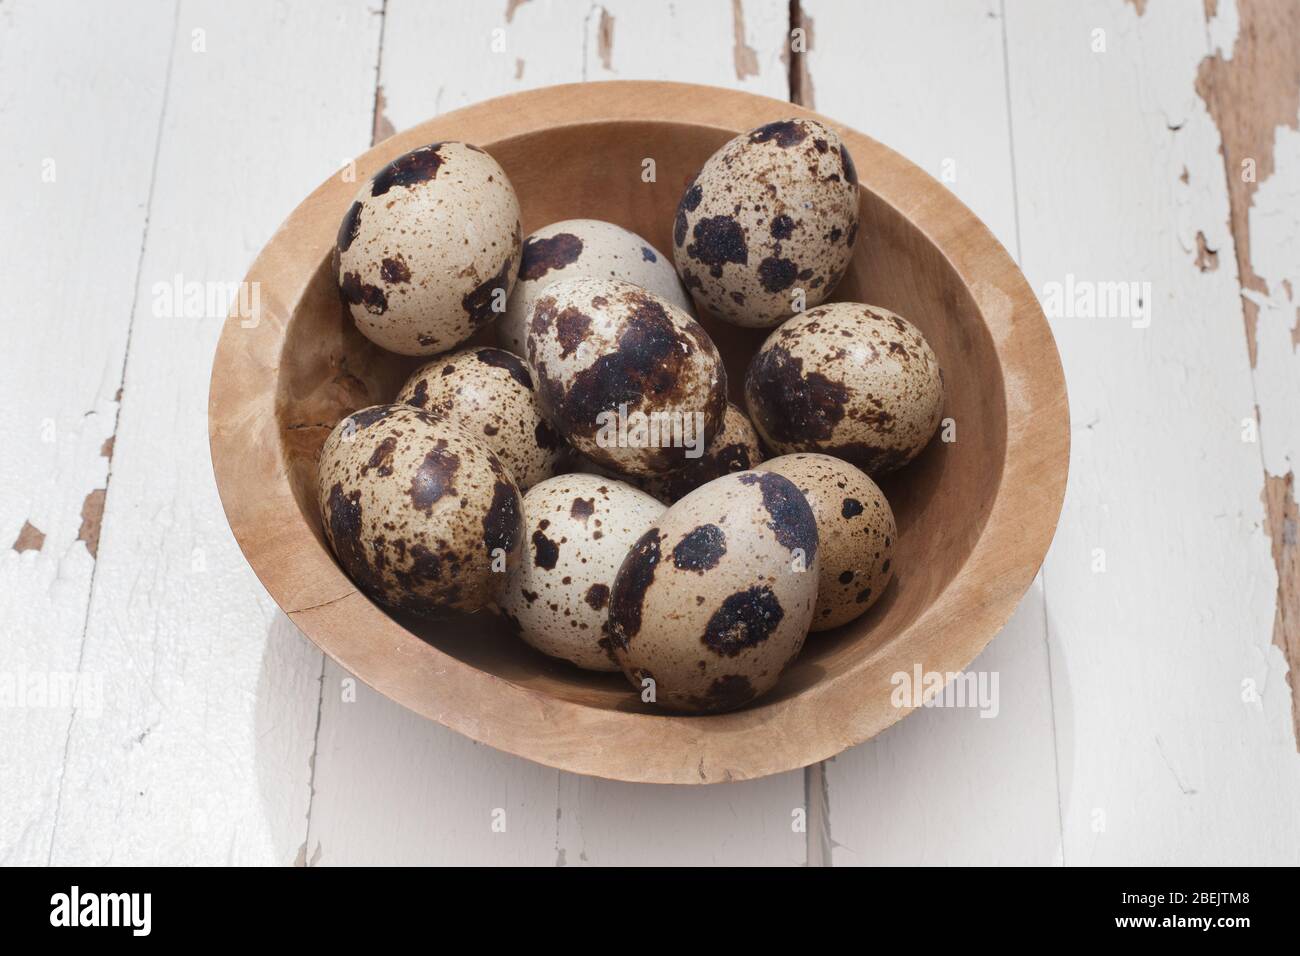 Quails eggs in a bowl against a white rustic wooden background Stock Photo